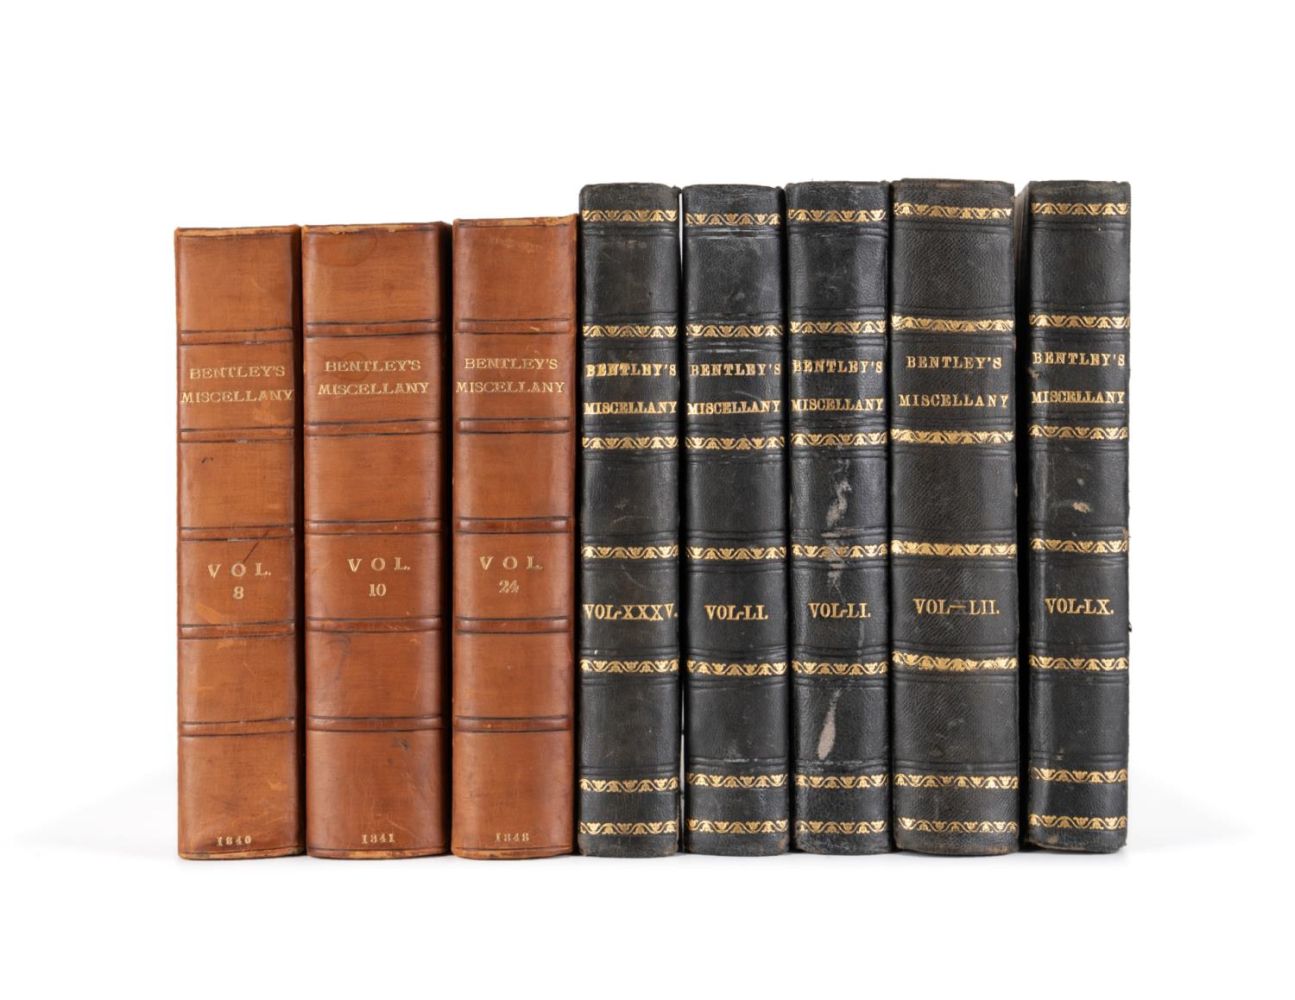 8VOL BENTLEY S MISCELLANY CHARLES 3cd4d8